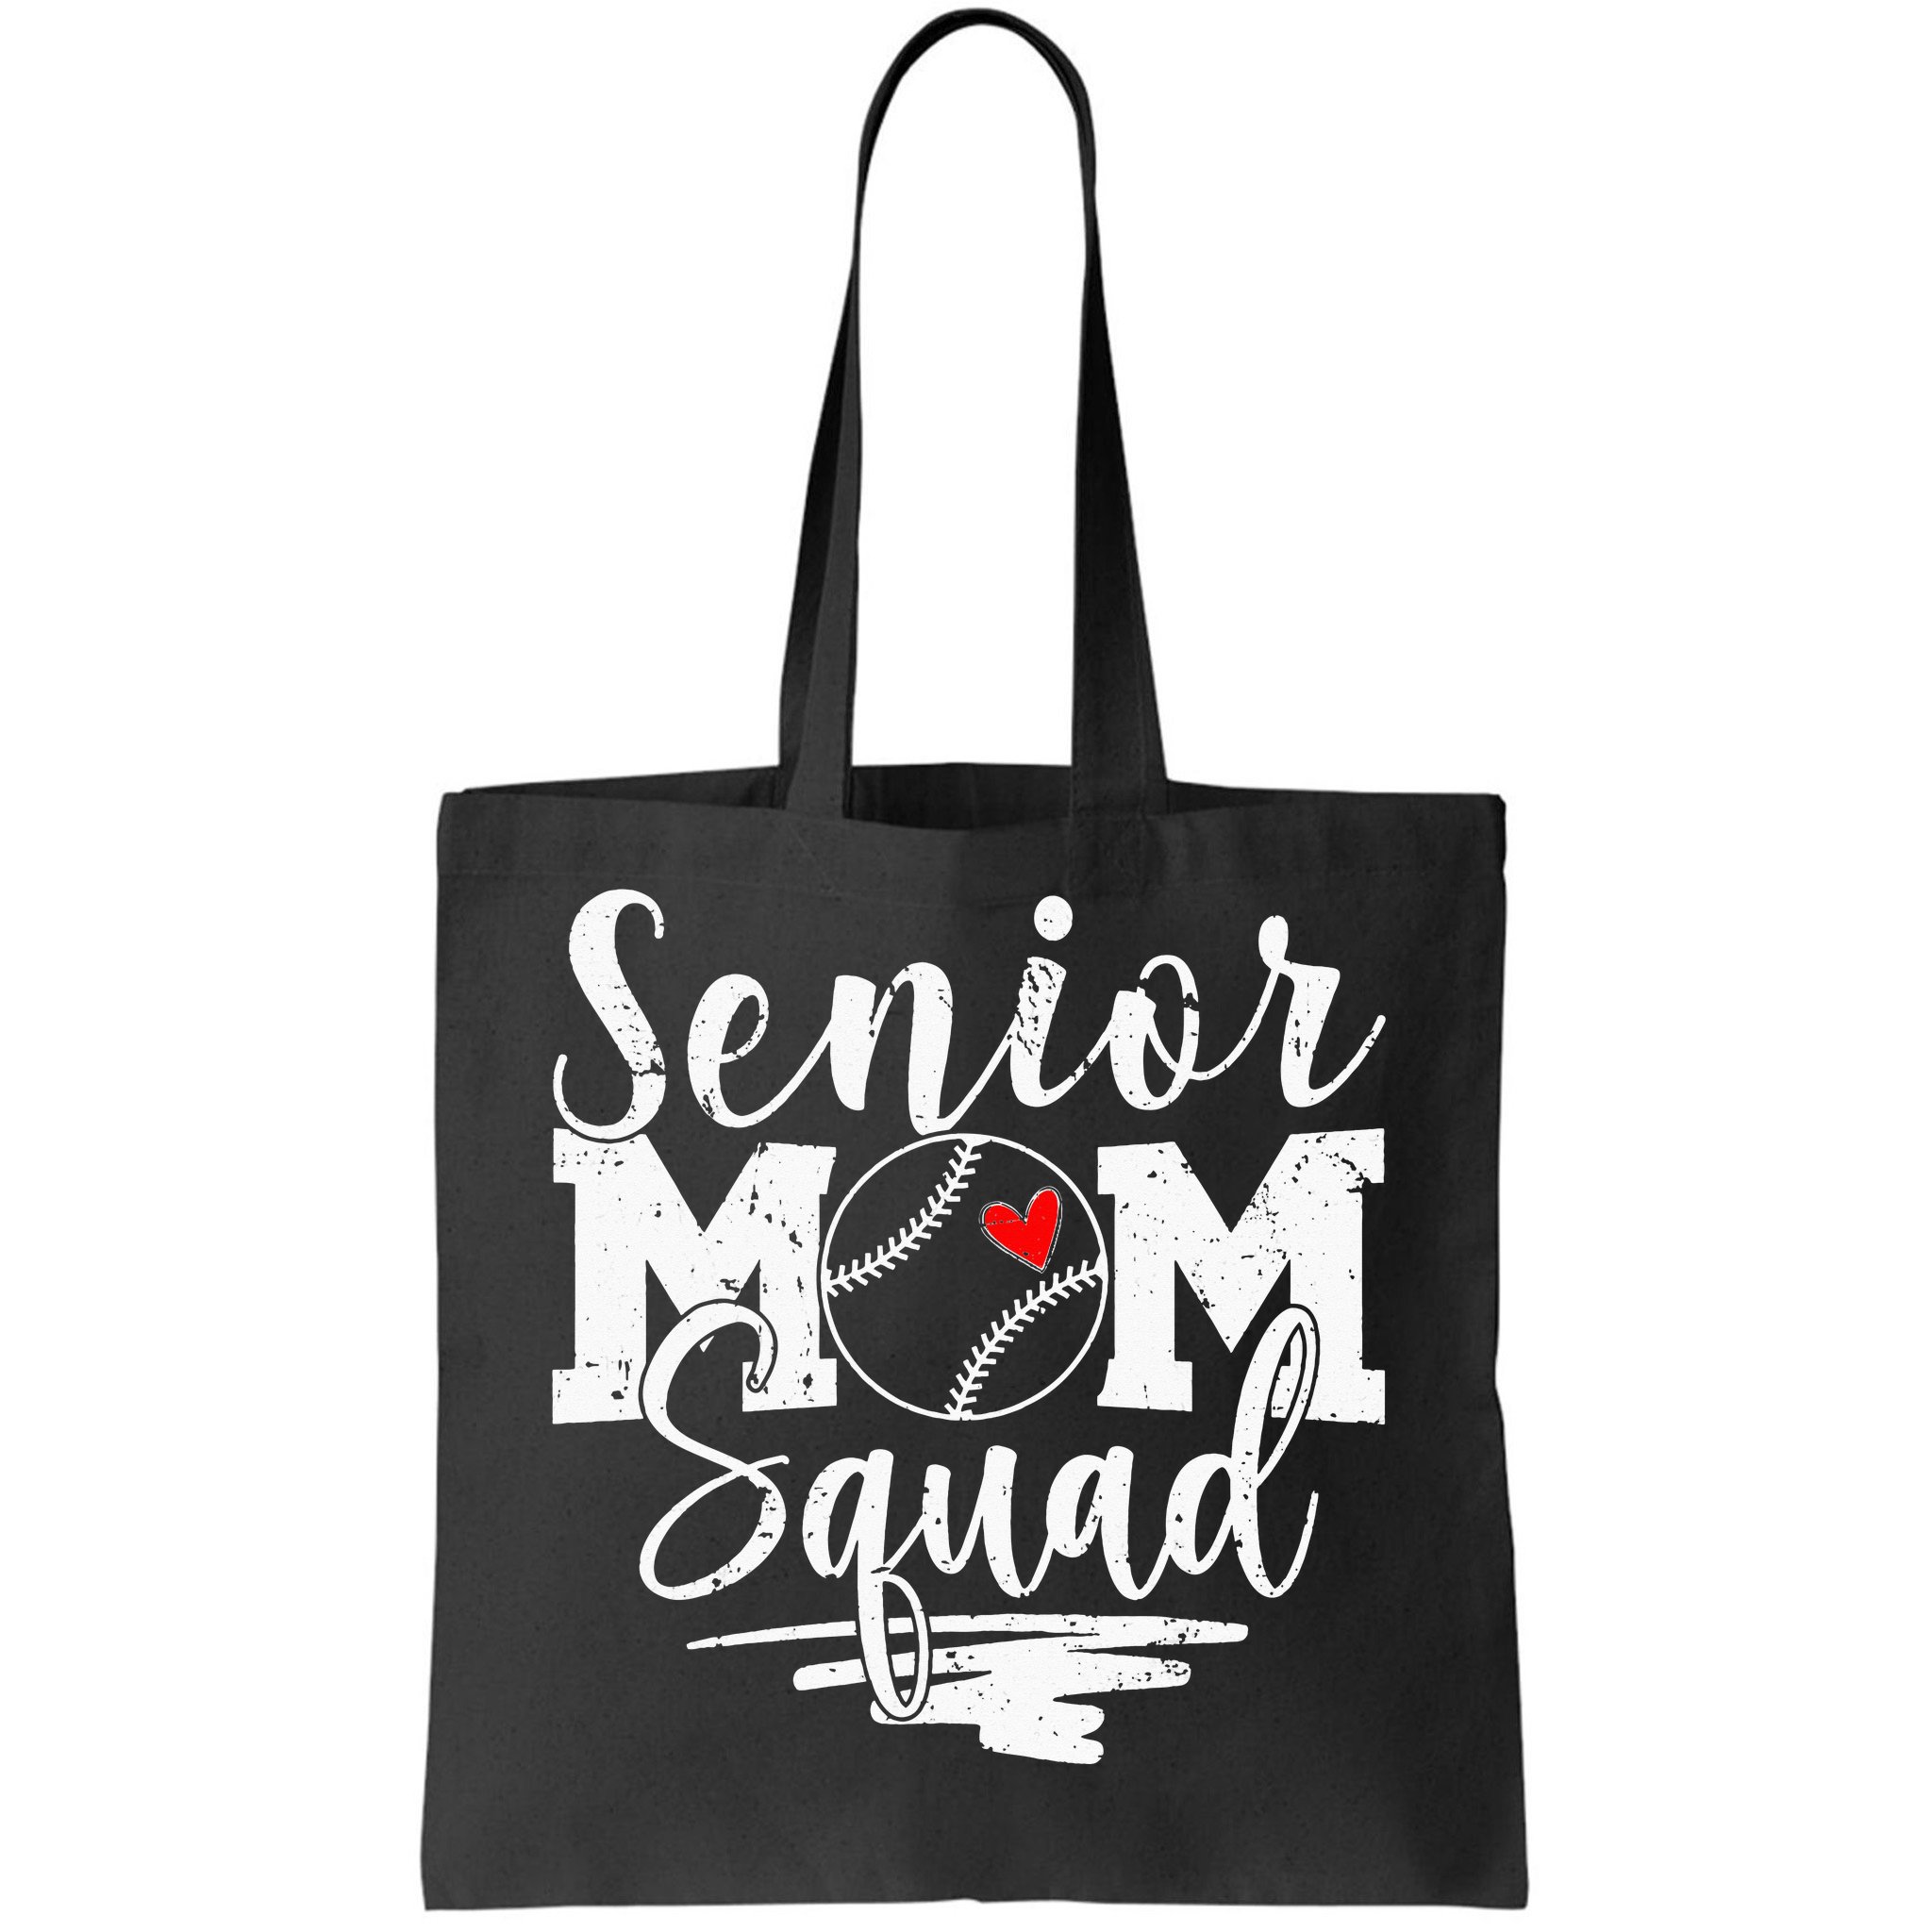 Senior Baseball Mom Squad Game Day Vibes Mother's Day Gifts T-Shirt